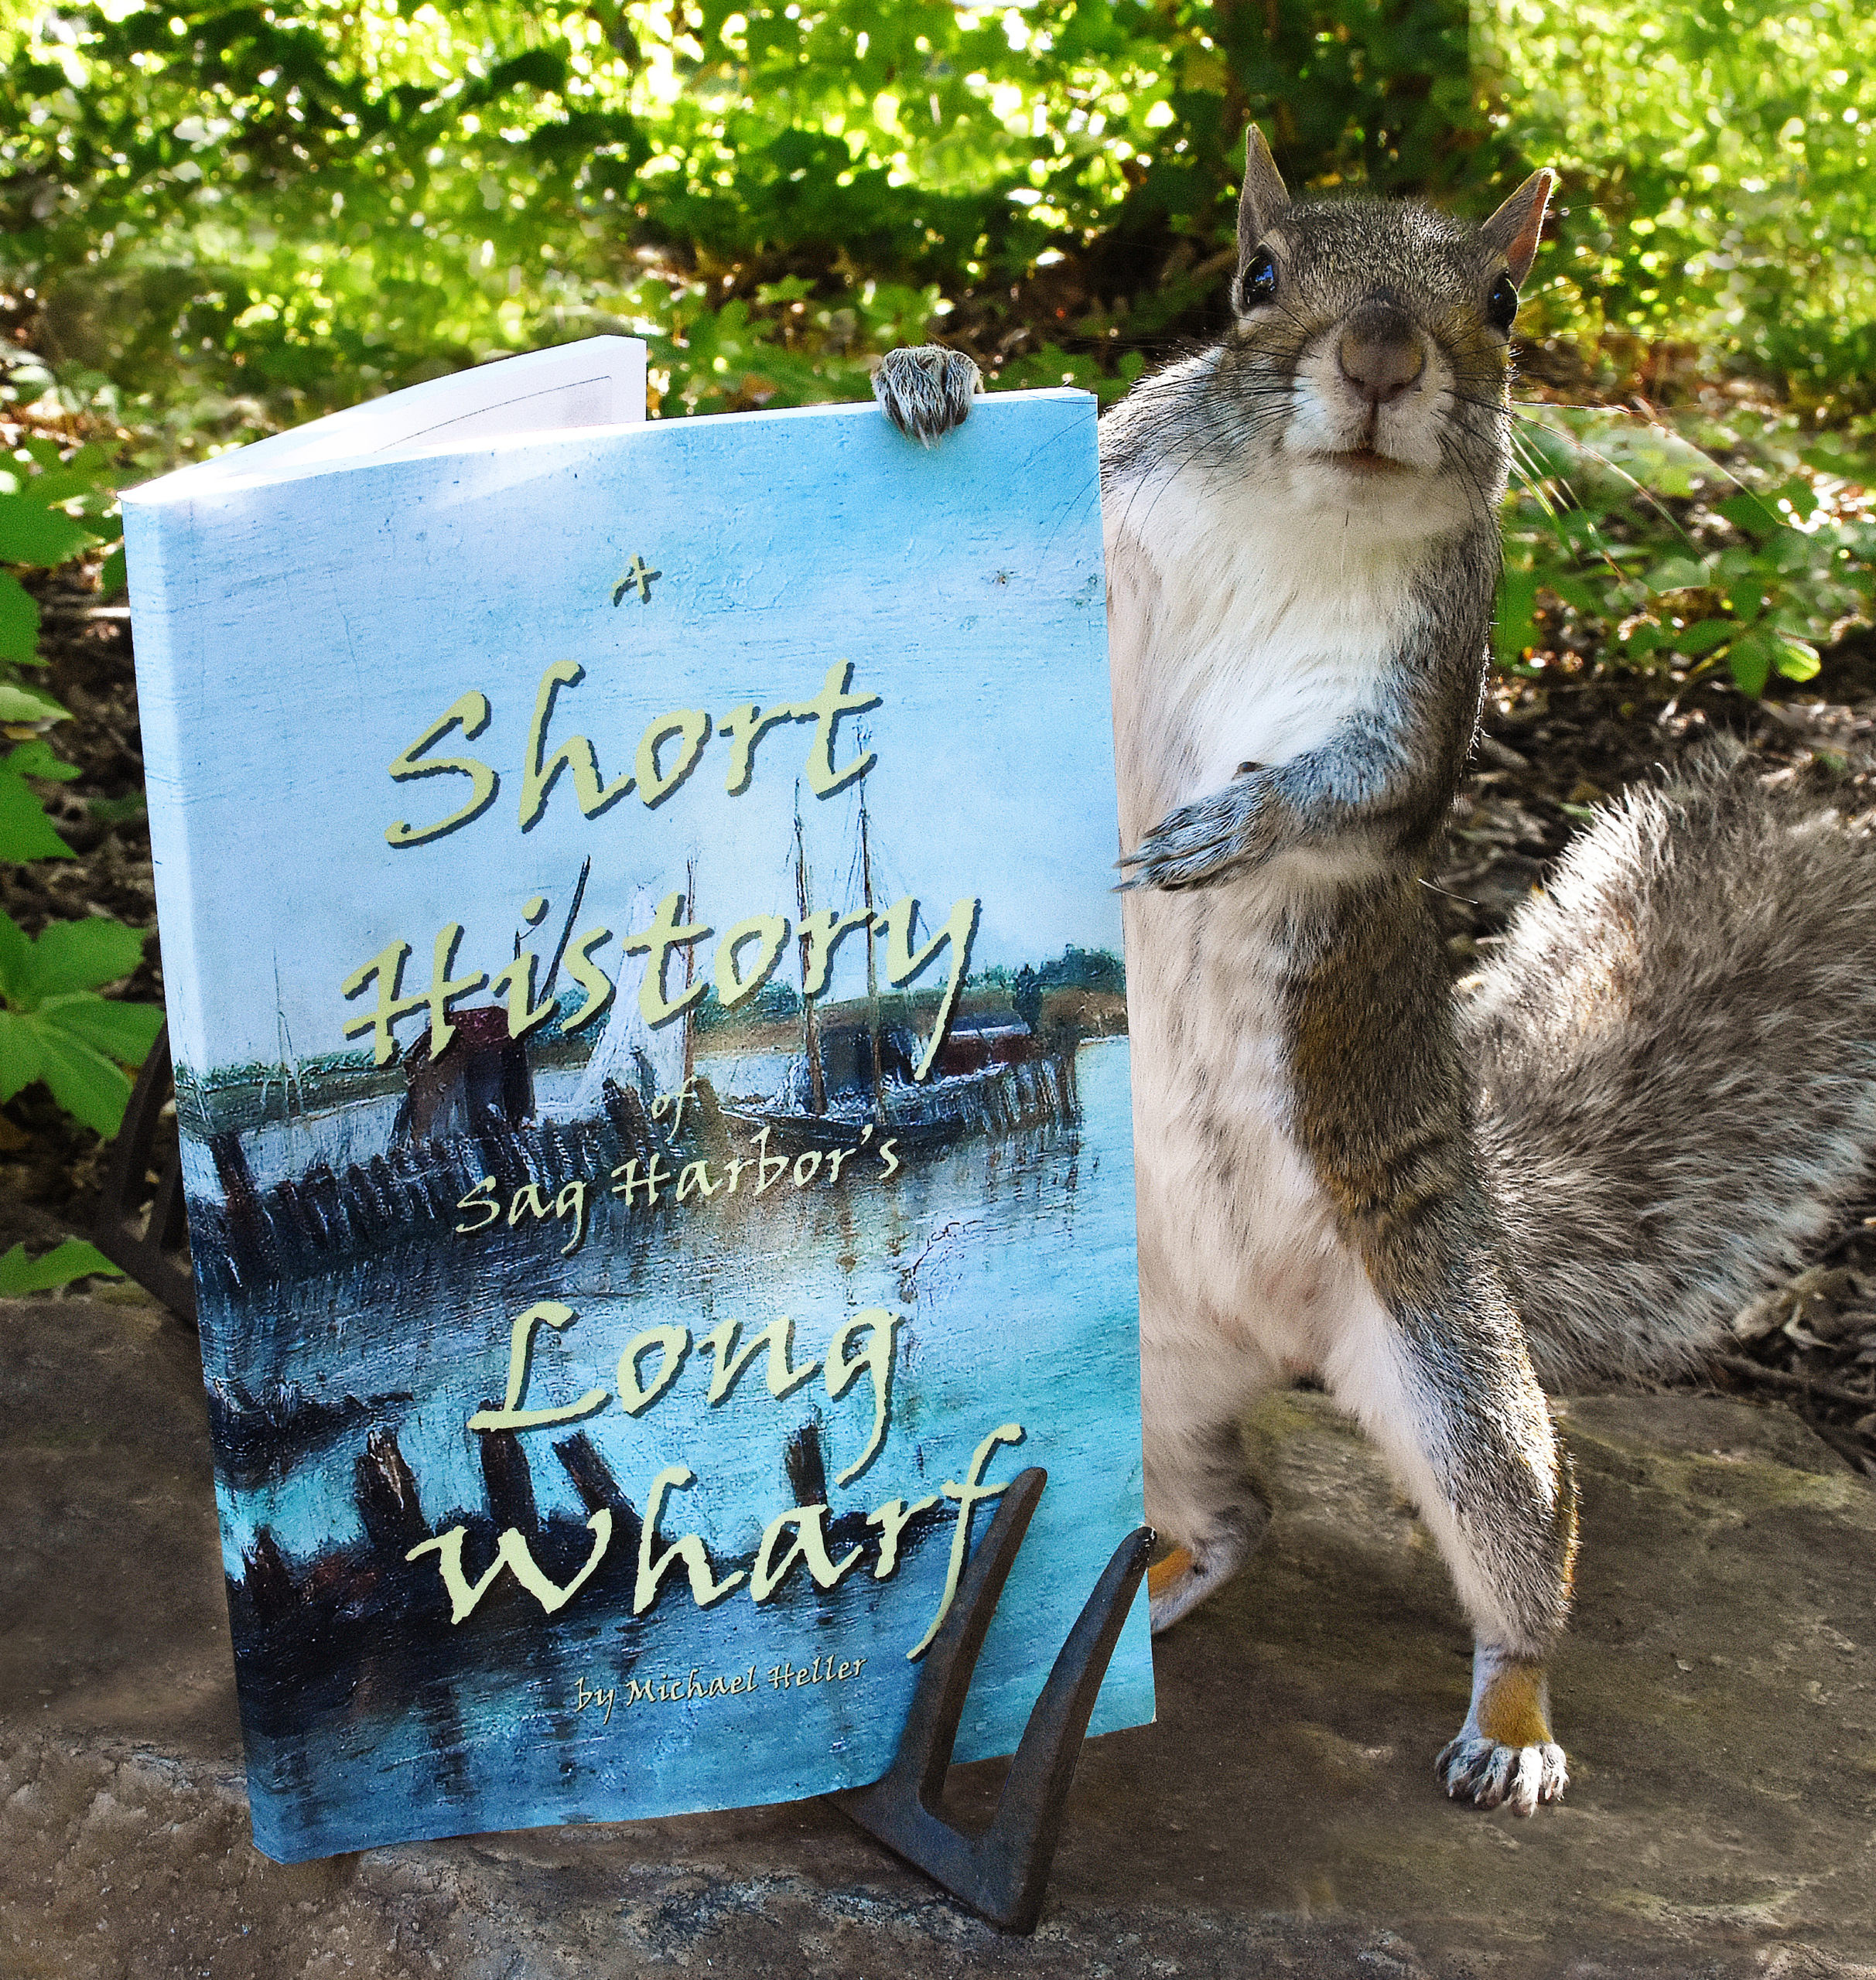 Squirrels are nuts for this book.